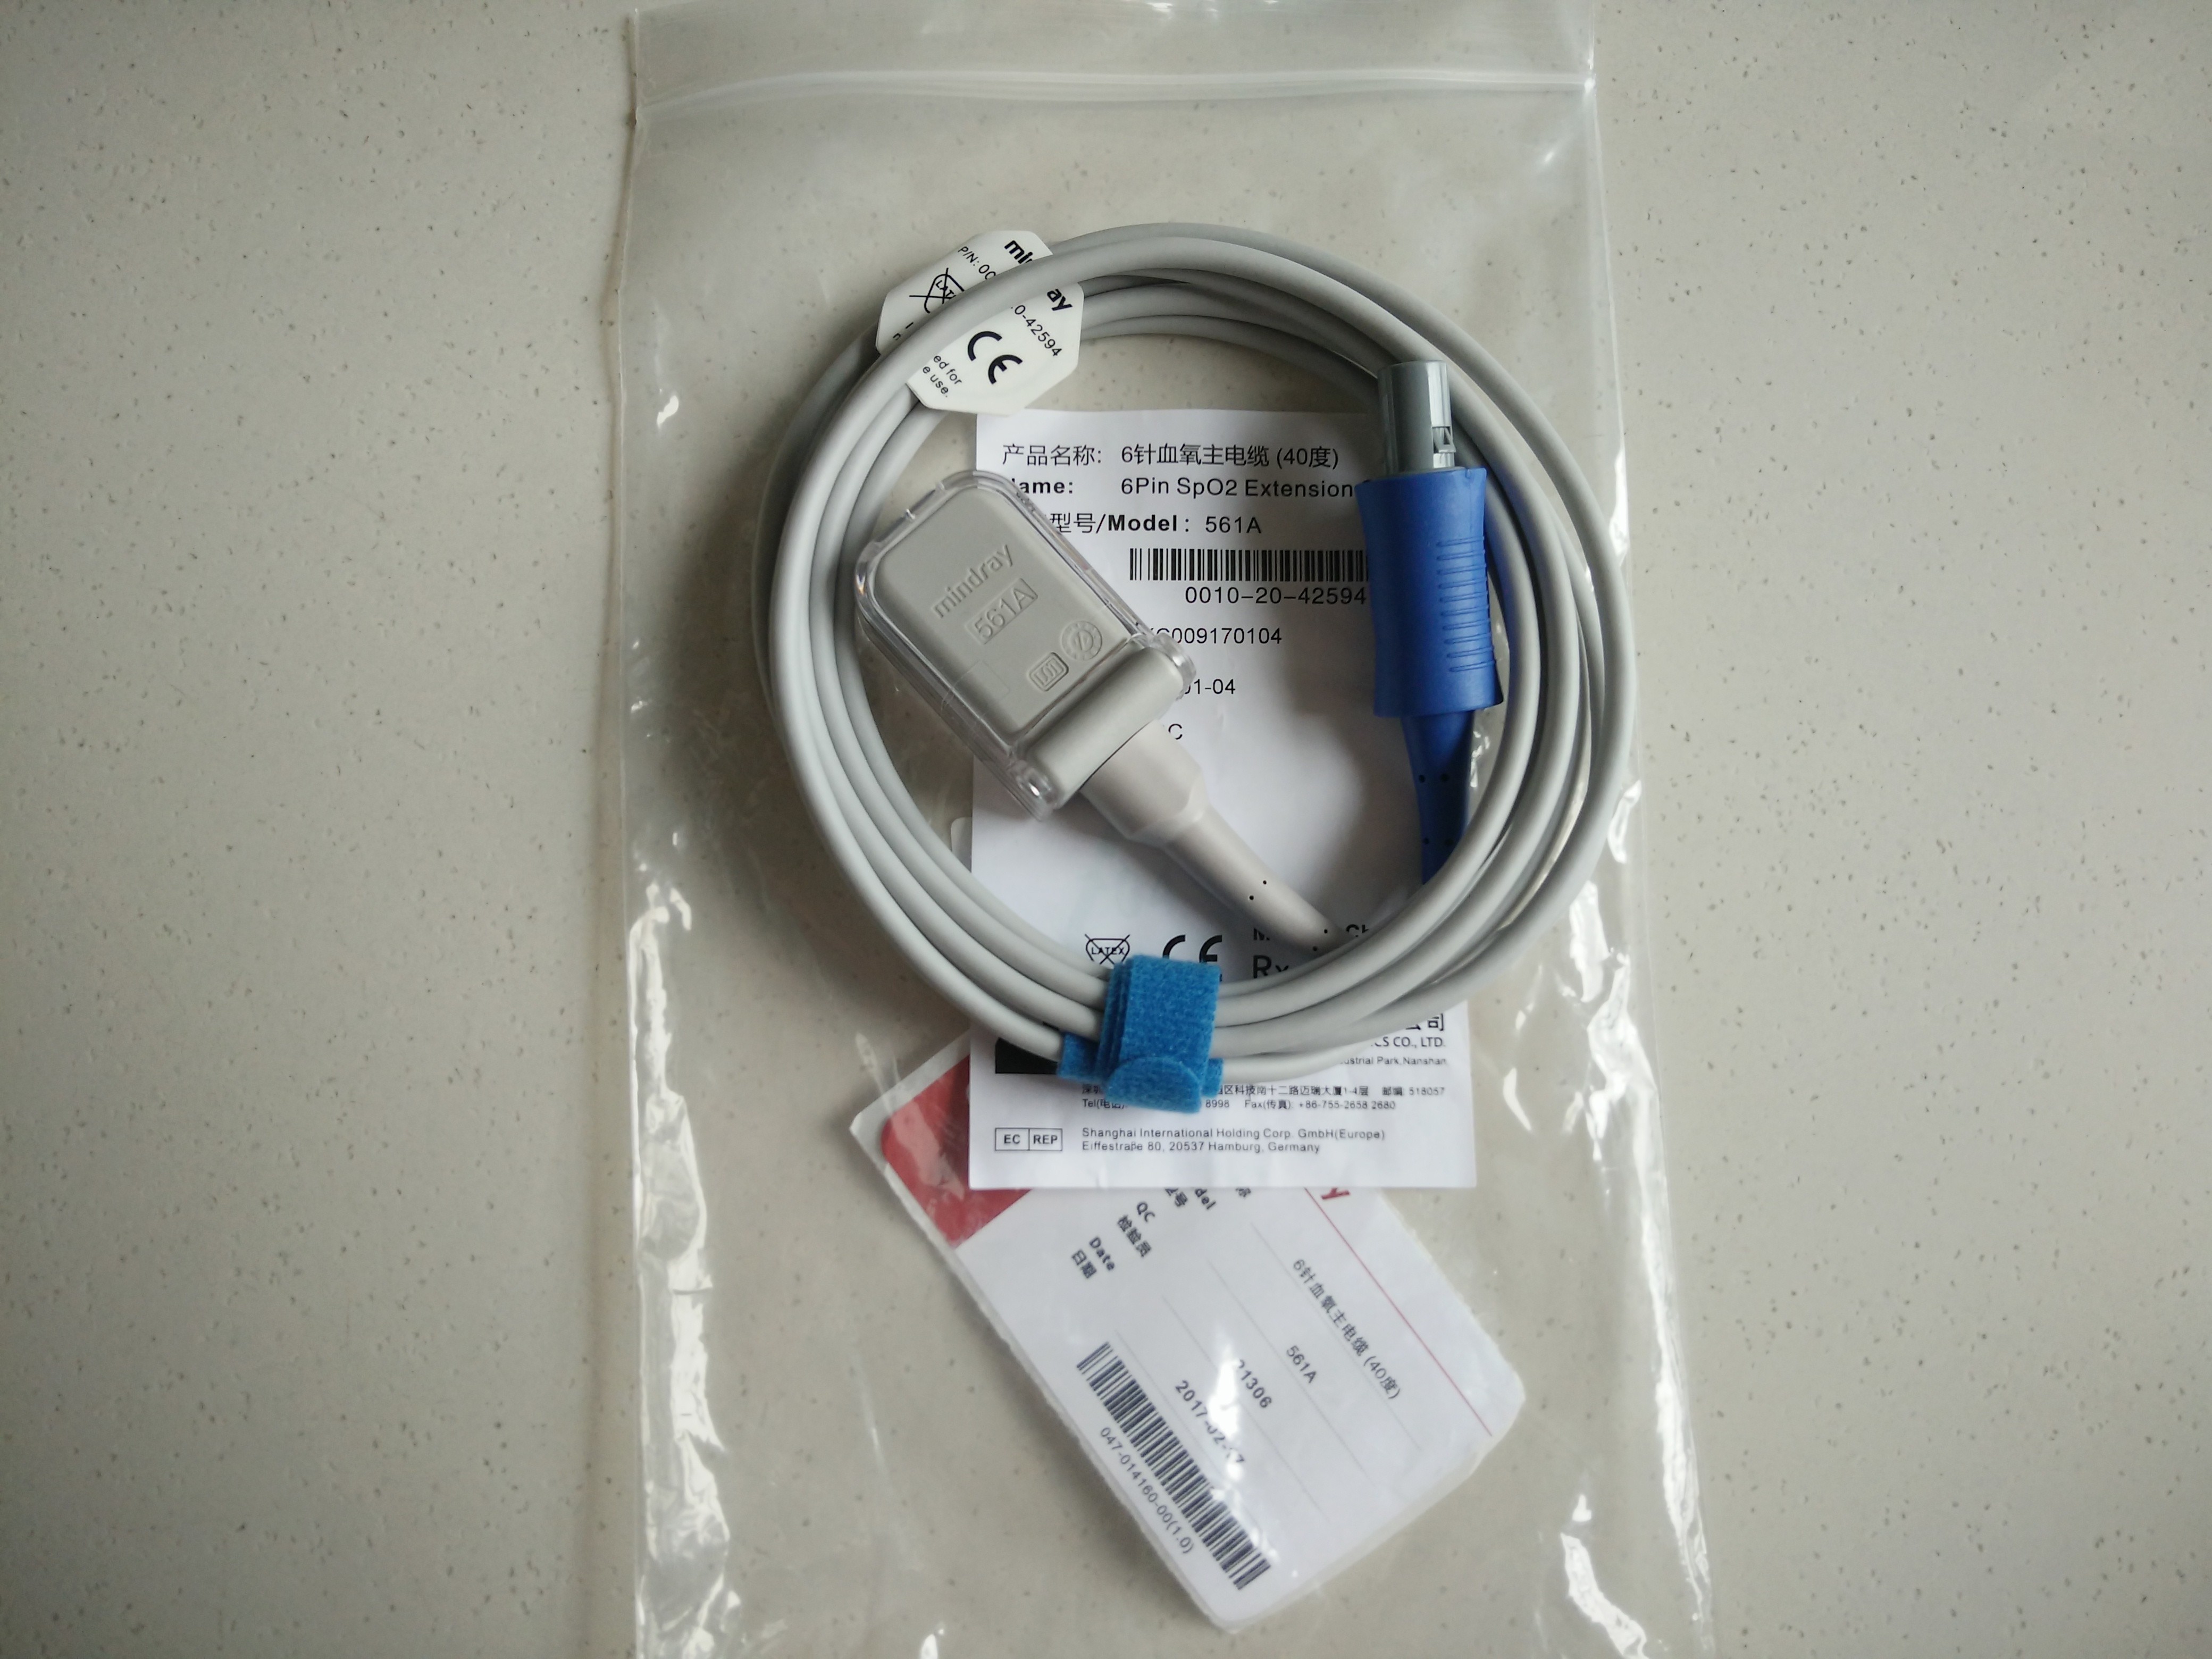 China Mindray 561A Masimo 0010-20-42594 6 Pin SPO2 Extension Cable on sale